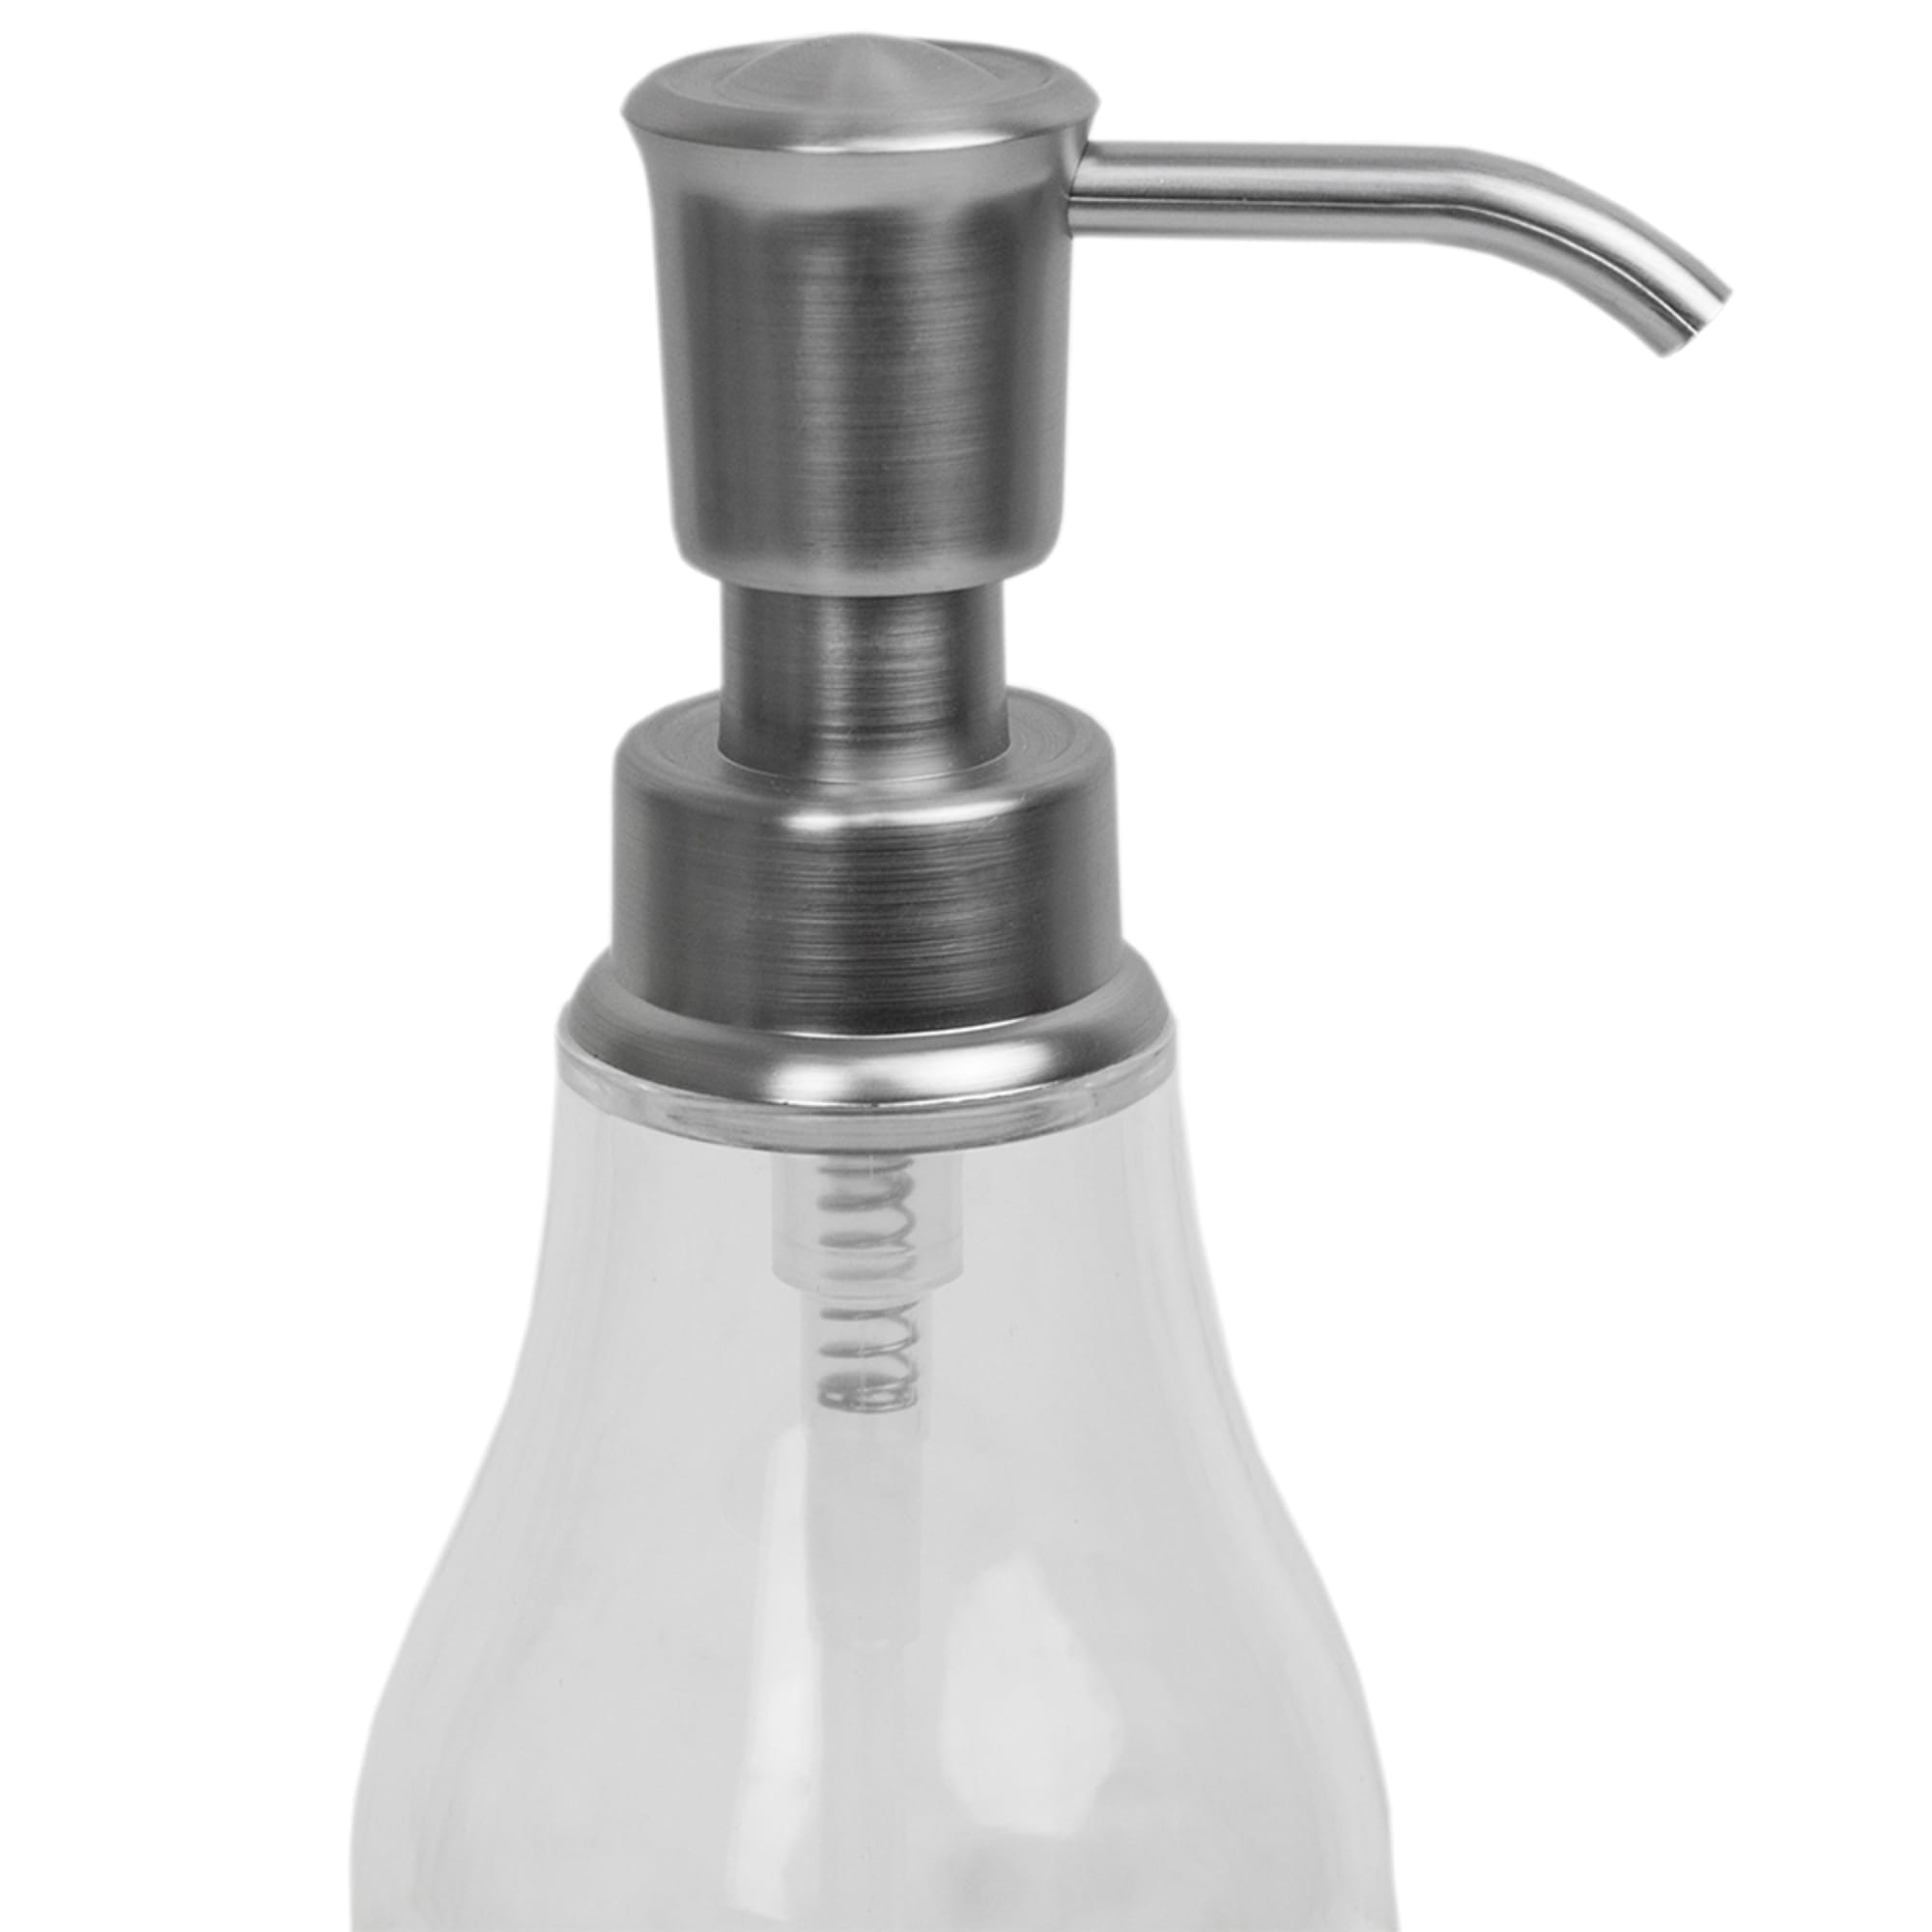 Home Basics Plastic Soap Dispenser with Brushed Steel Top, Chrome $5 EACH, CASE PACK OF 12